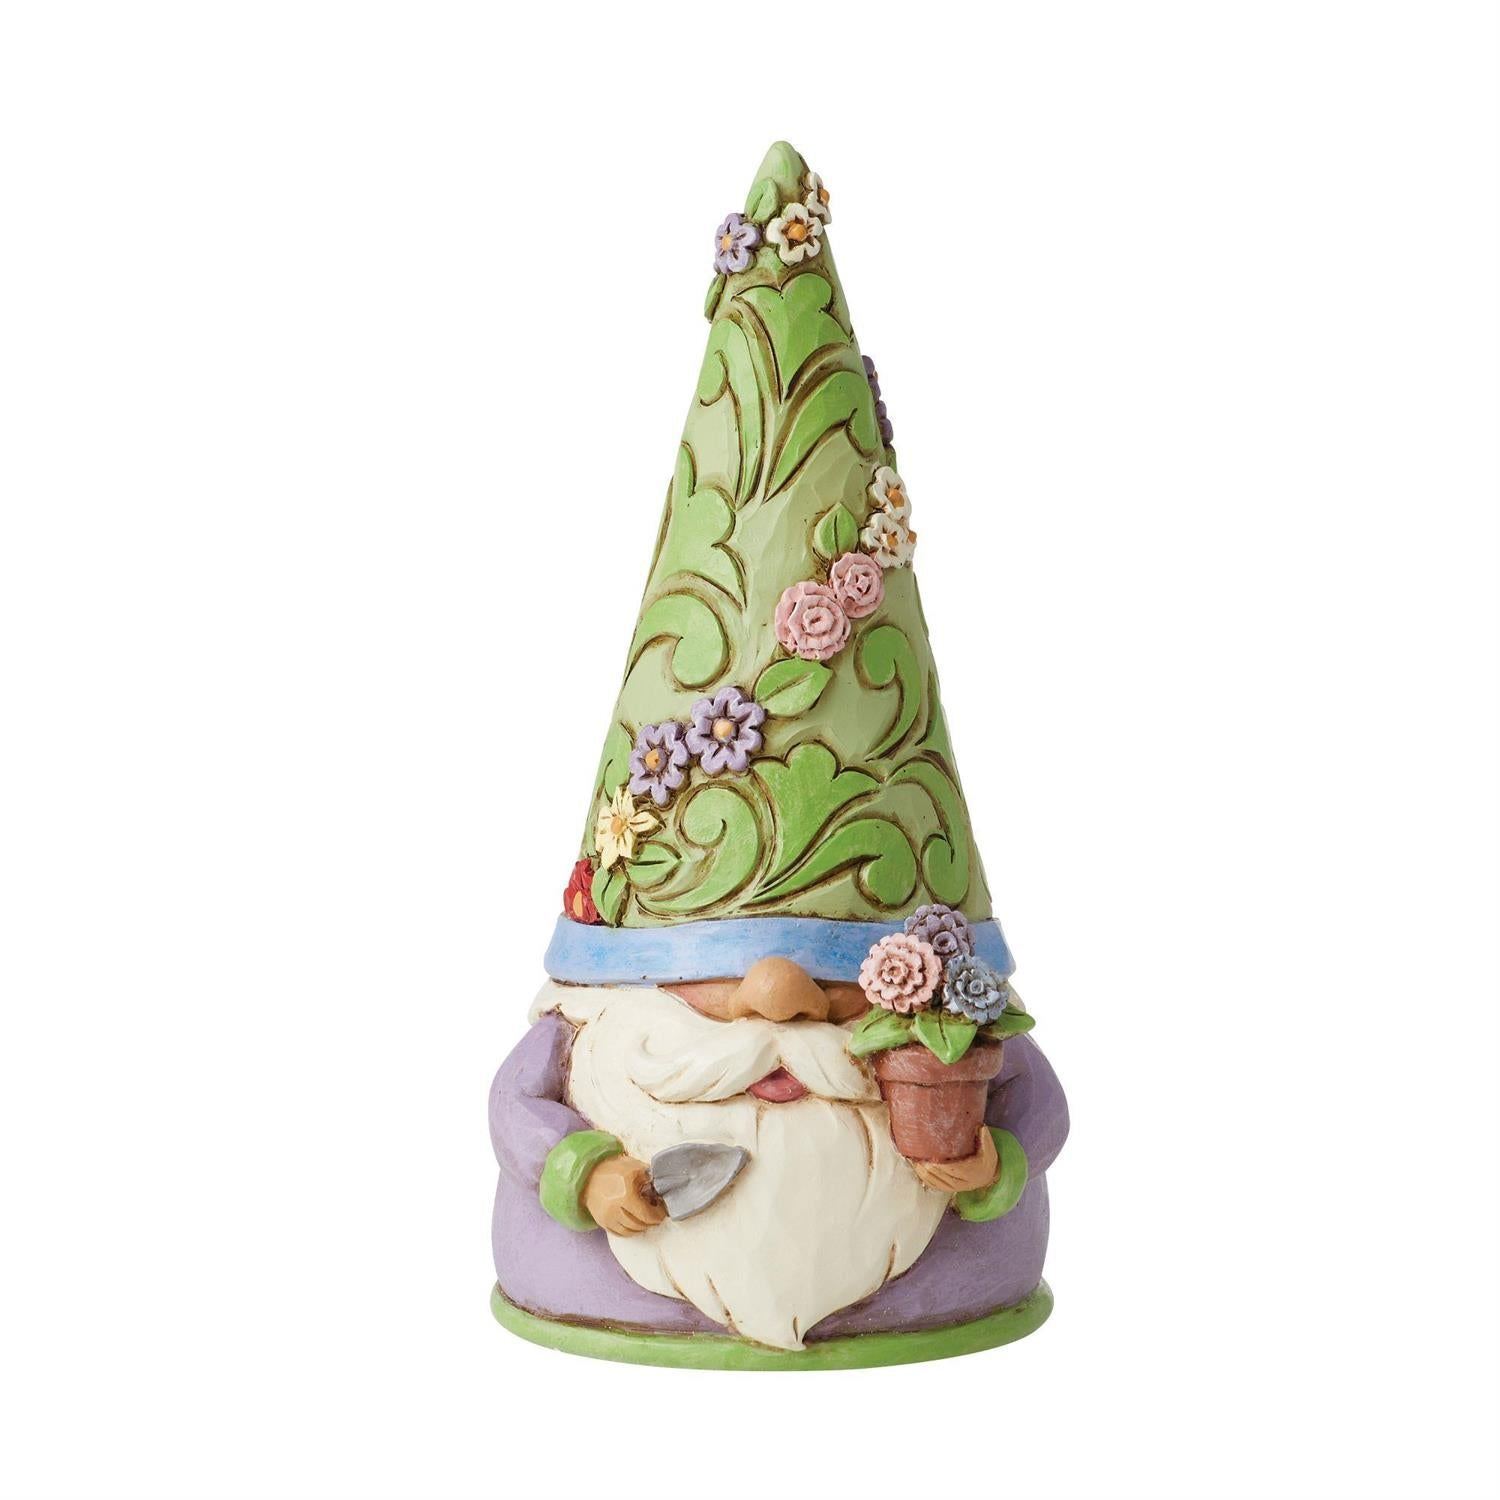 Jim Shore Heartwood Creek: An Artist For Spring Gnome Figurine 6013137